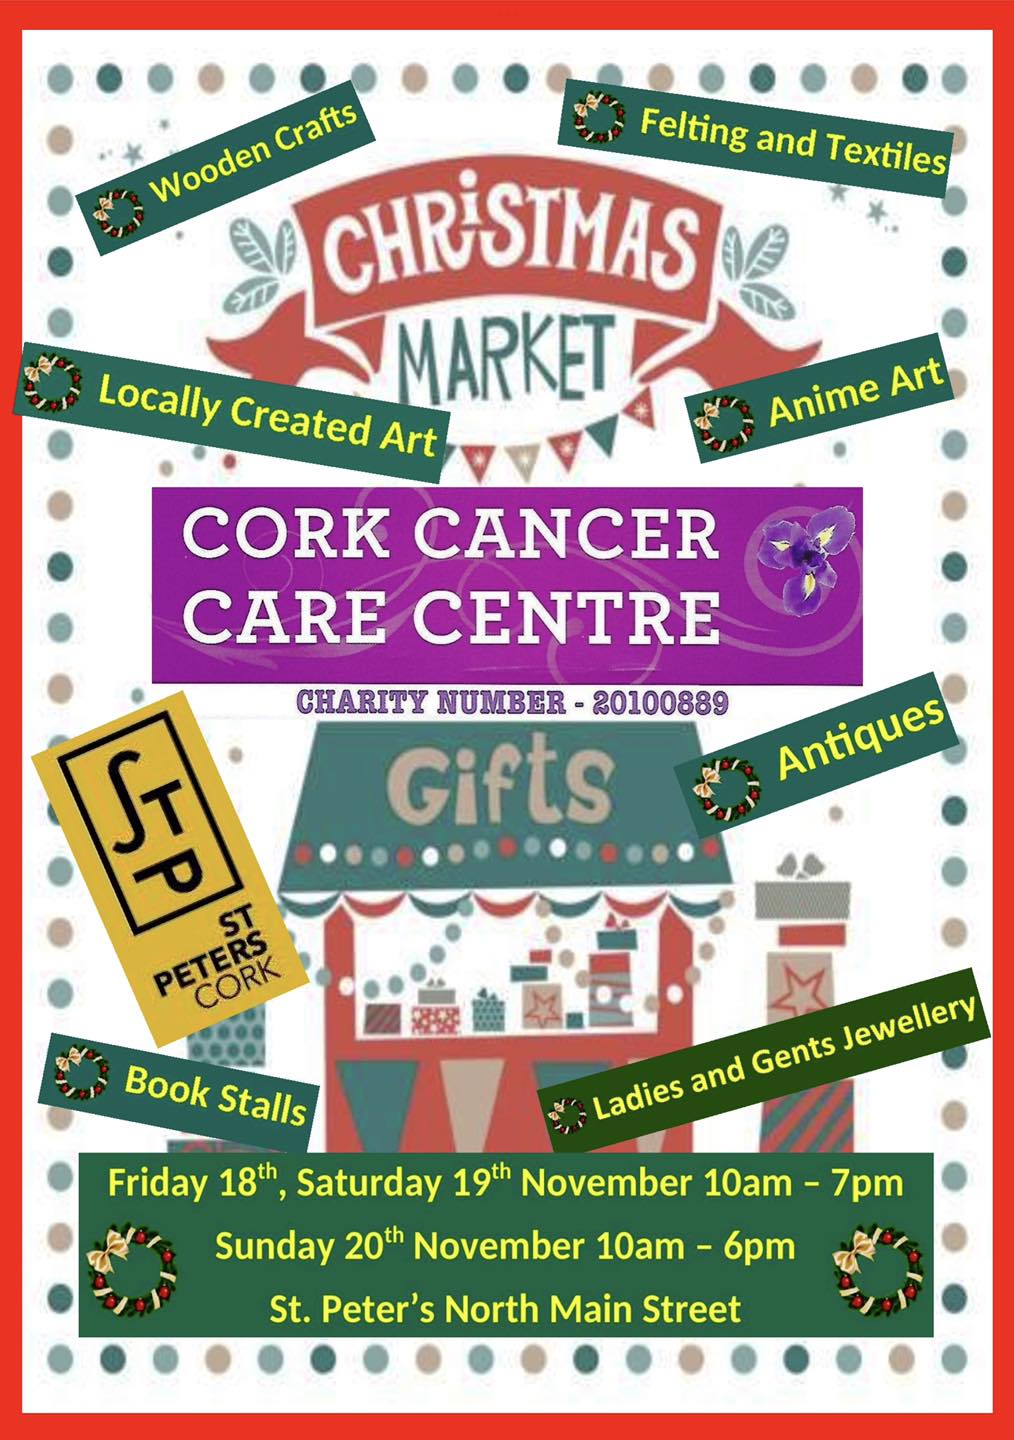 Christmas Market in aid of Cork Cancer Care Centre